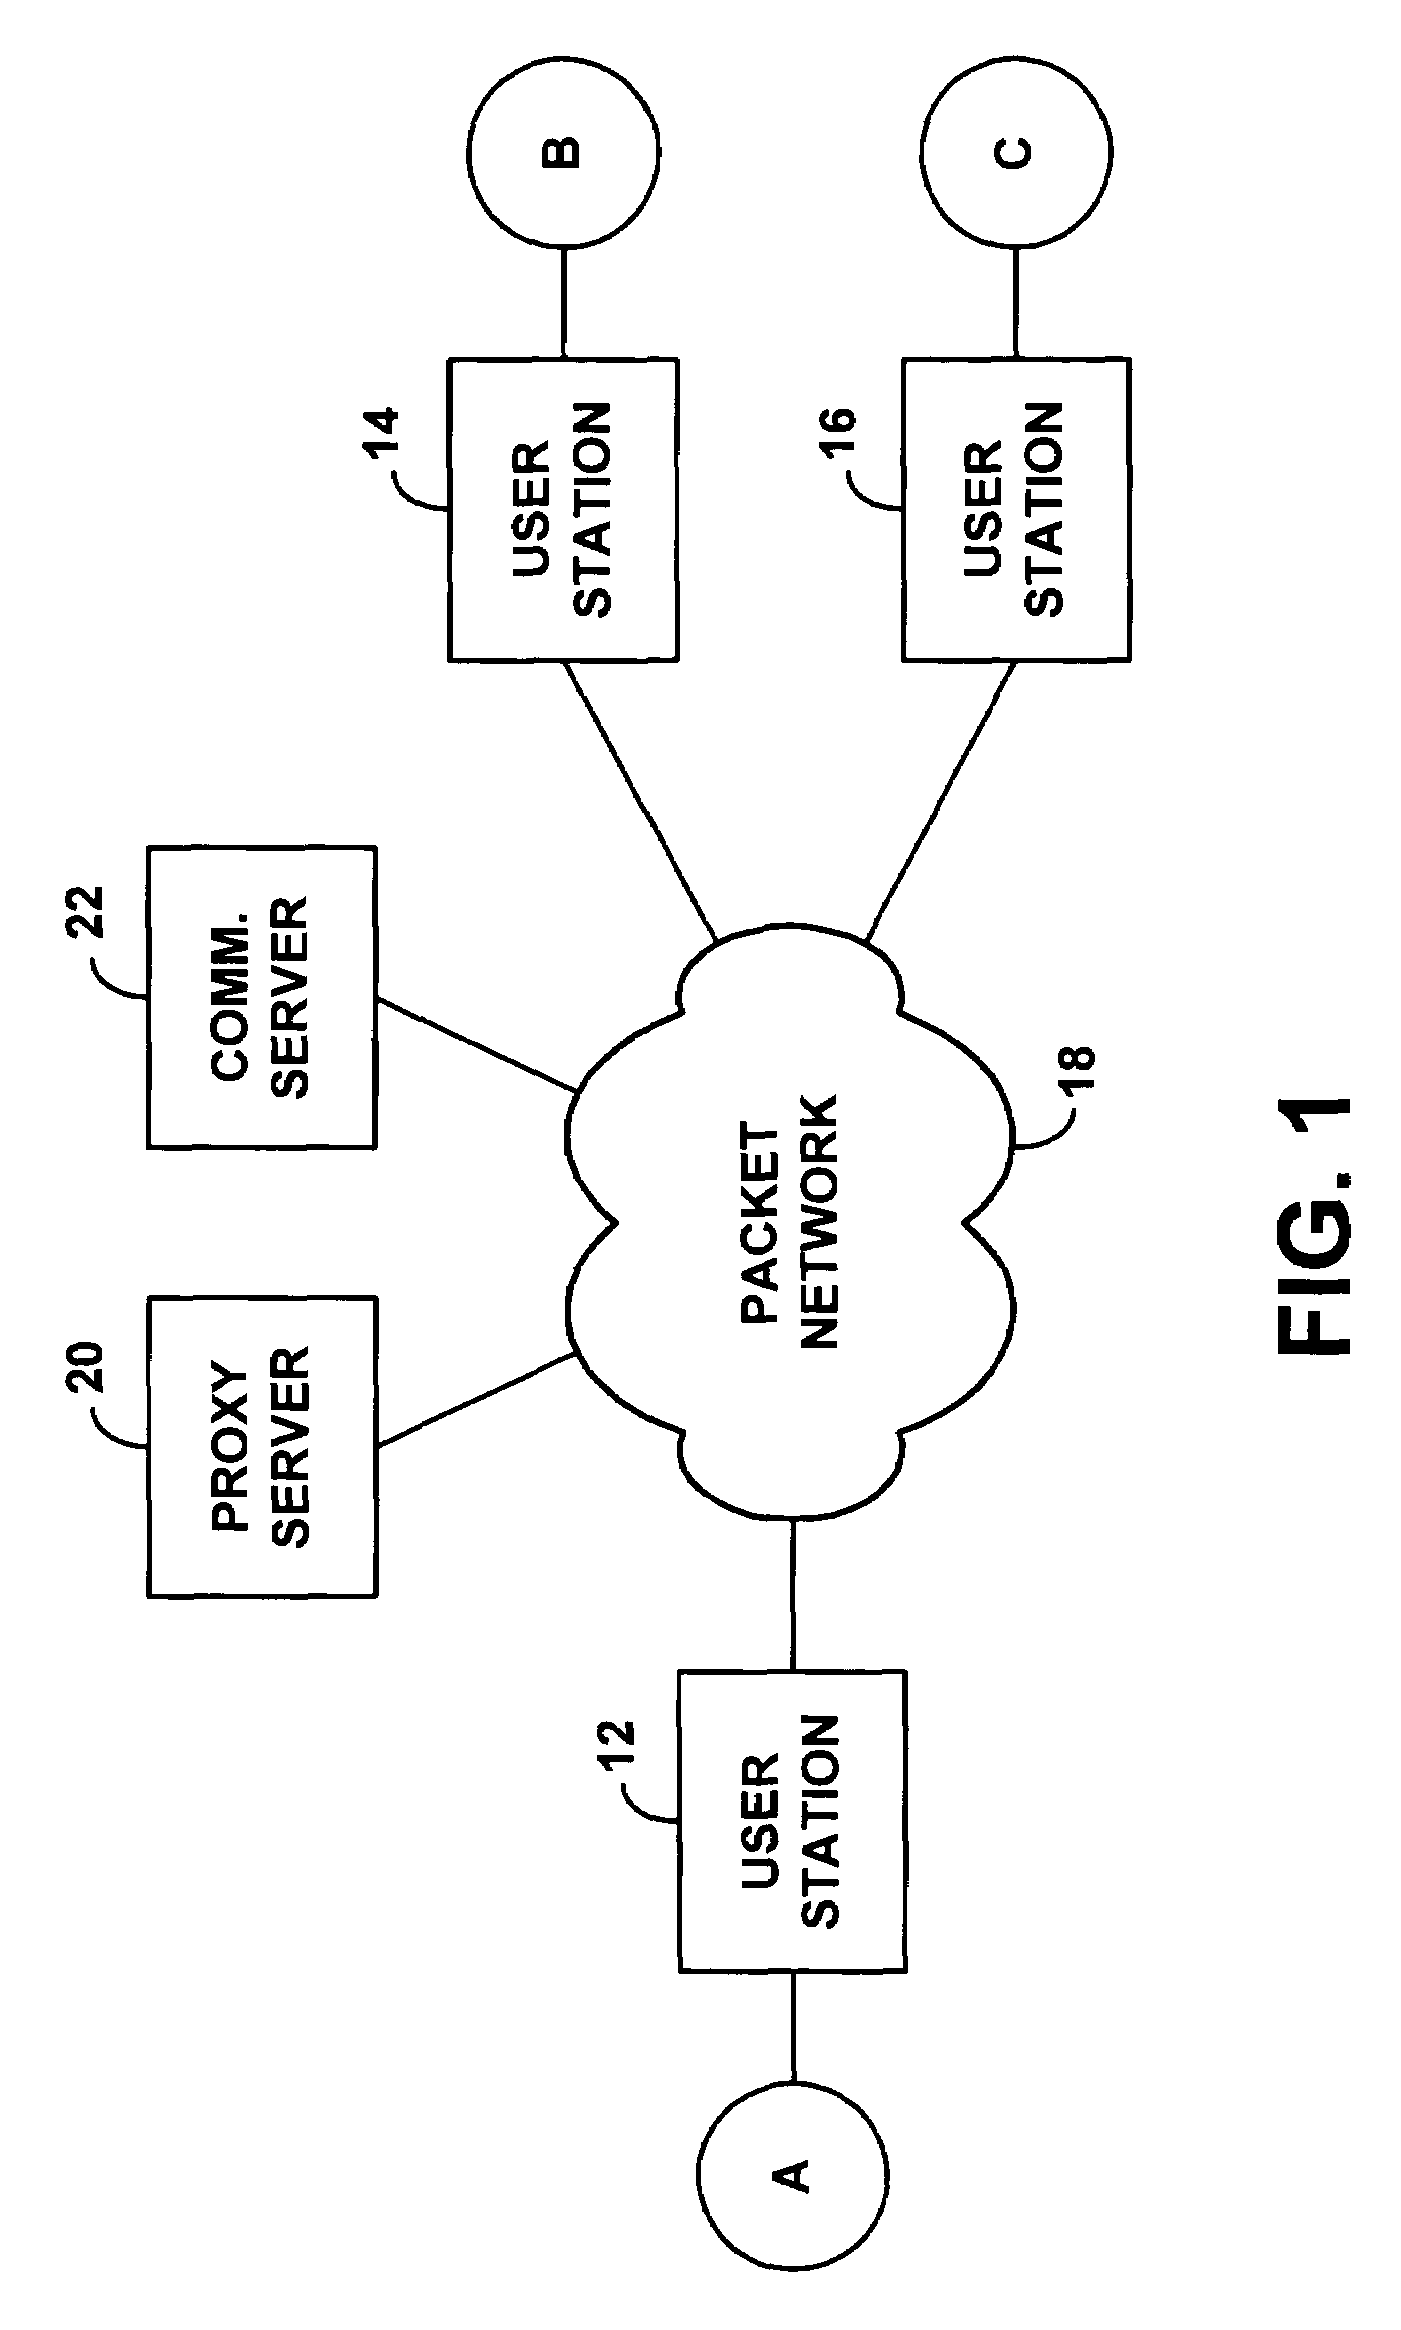 Method and system for selectively operating in a half-duplex mode or full-duplex mode in a packet-based real-time media conference